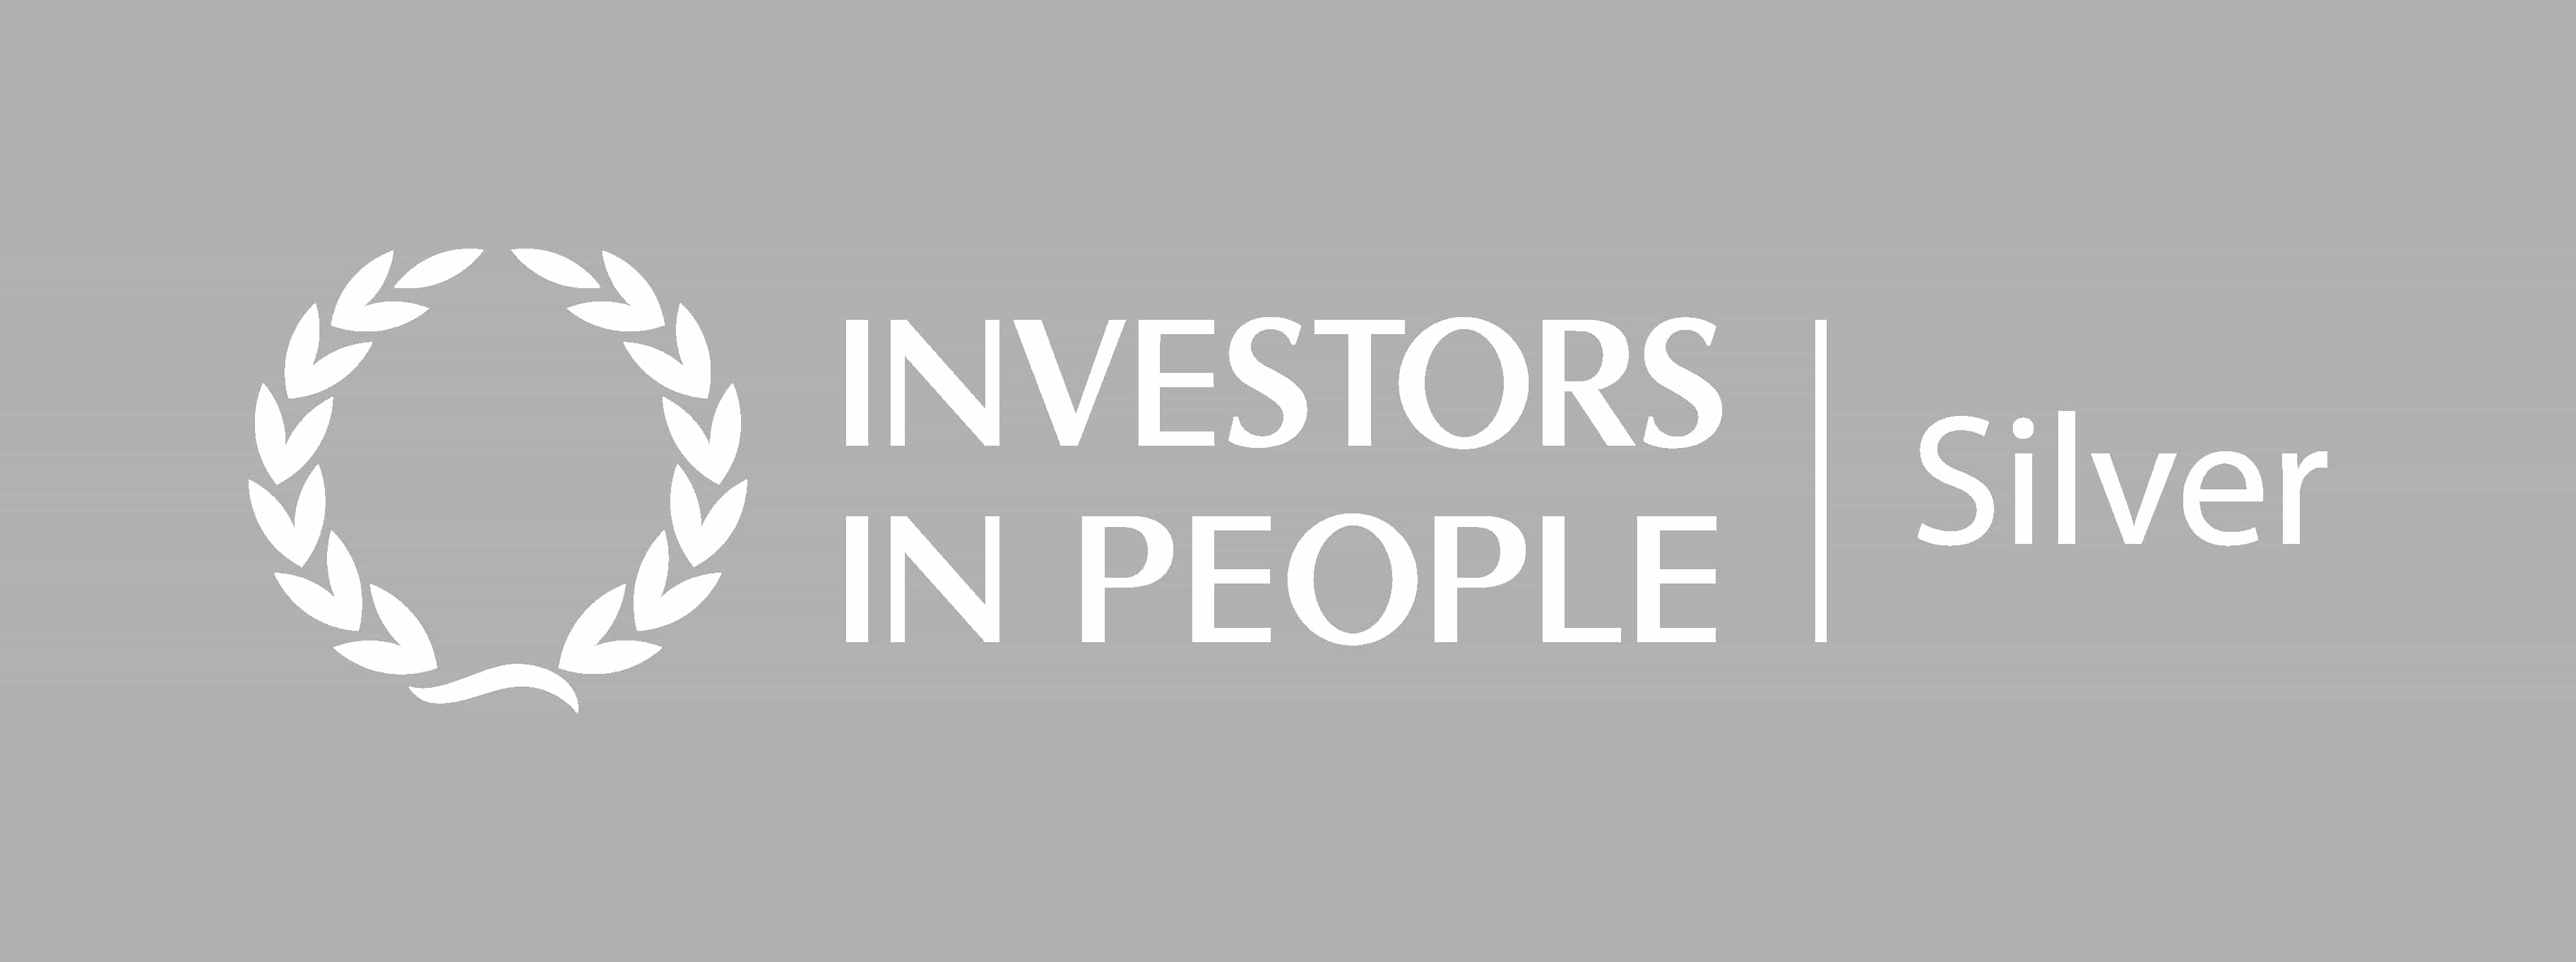 Kingdom Support and Care gains Silver Investors in People Accreditation